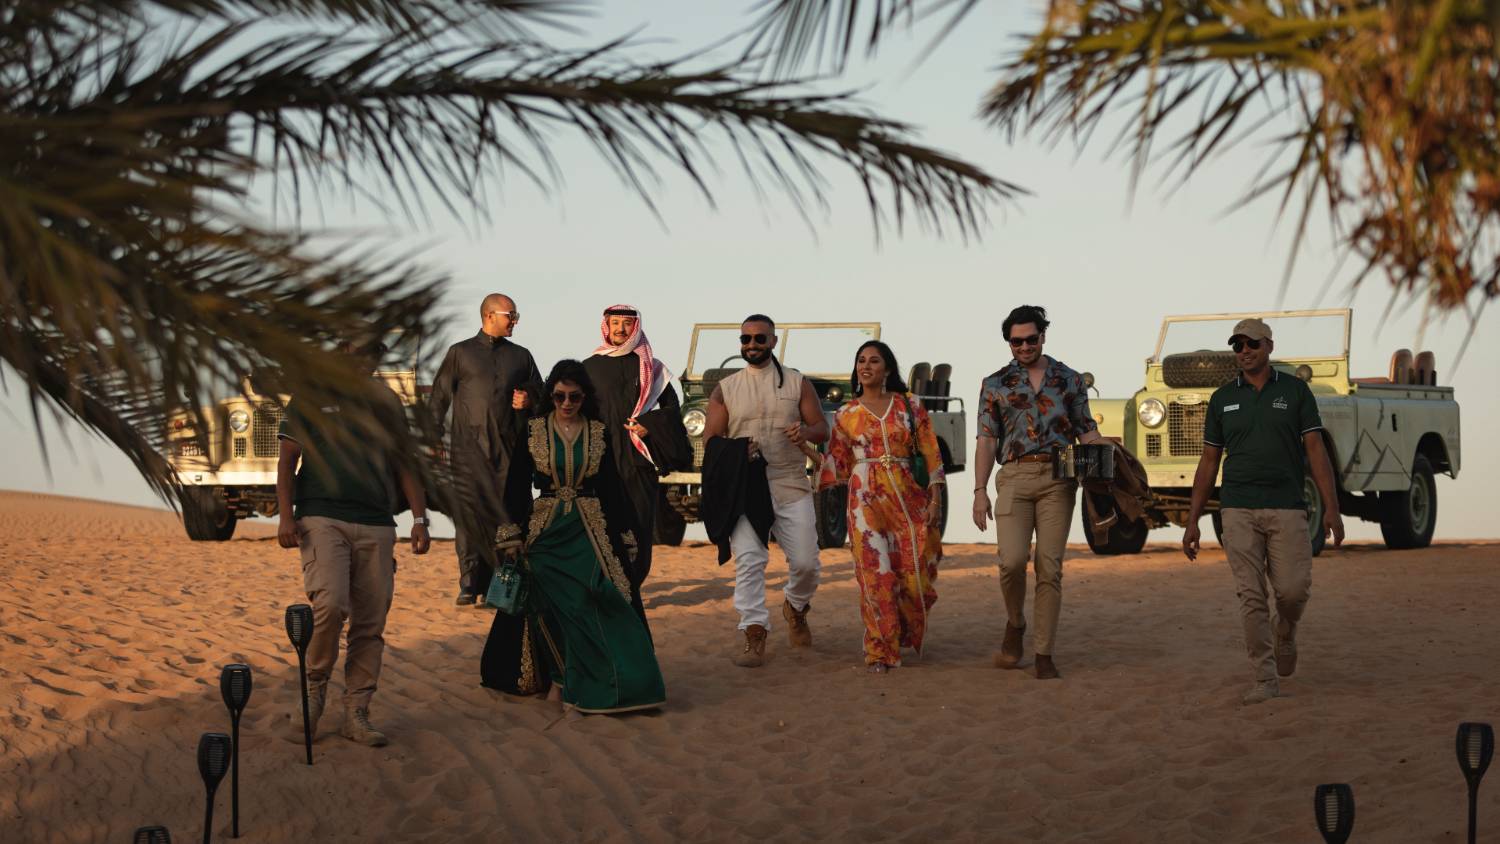 A trip to the desert by the cast is filled with staged drama and pettiness (Netflix)